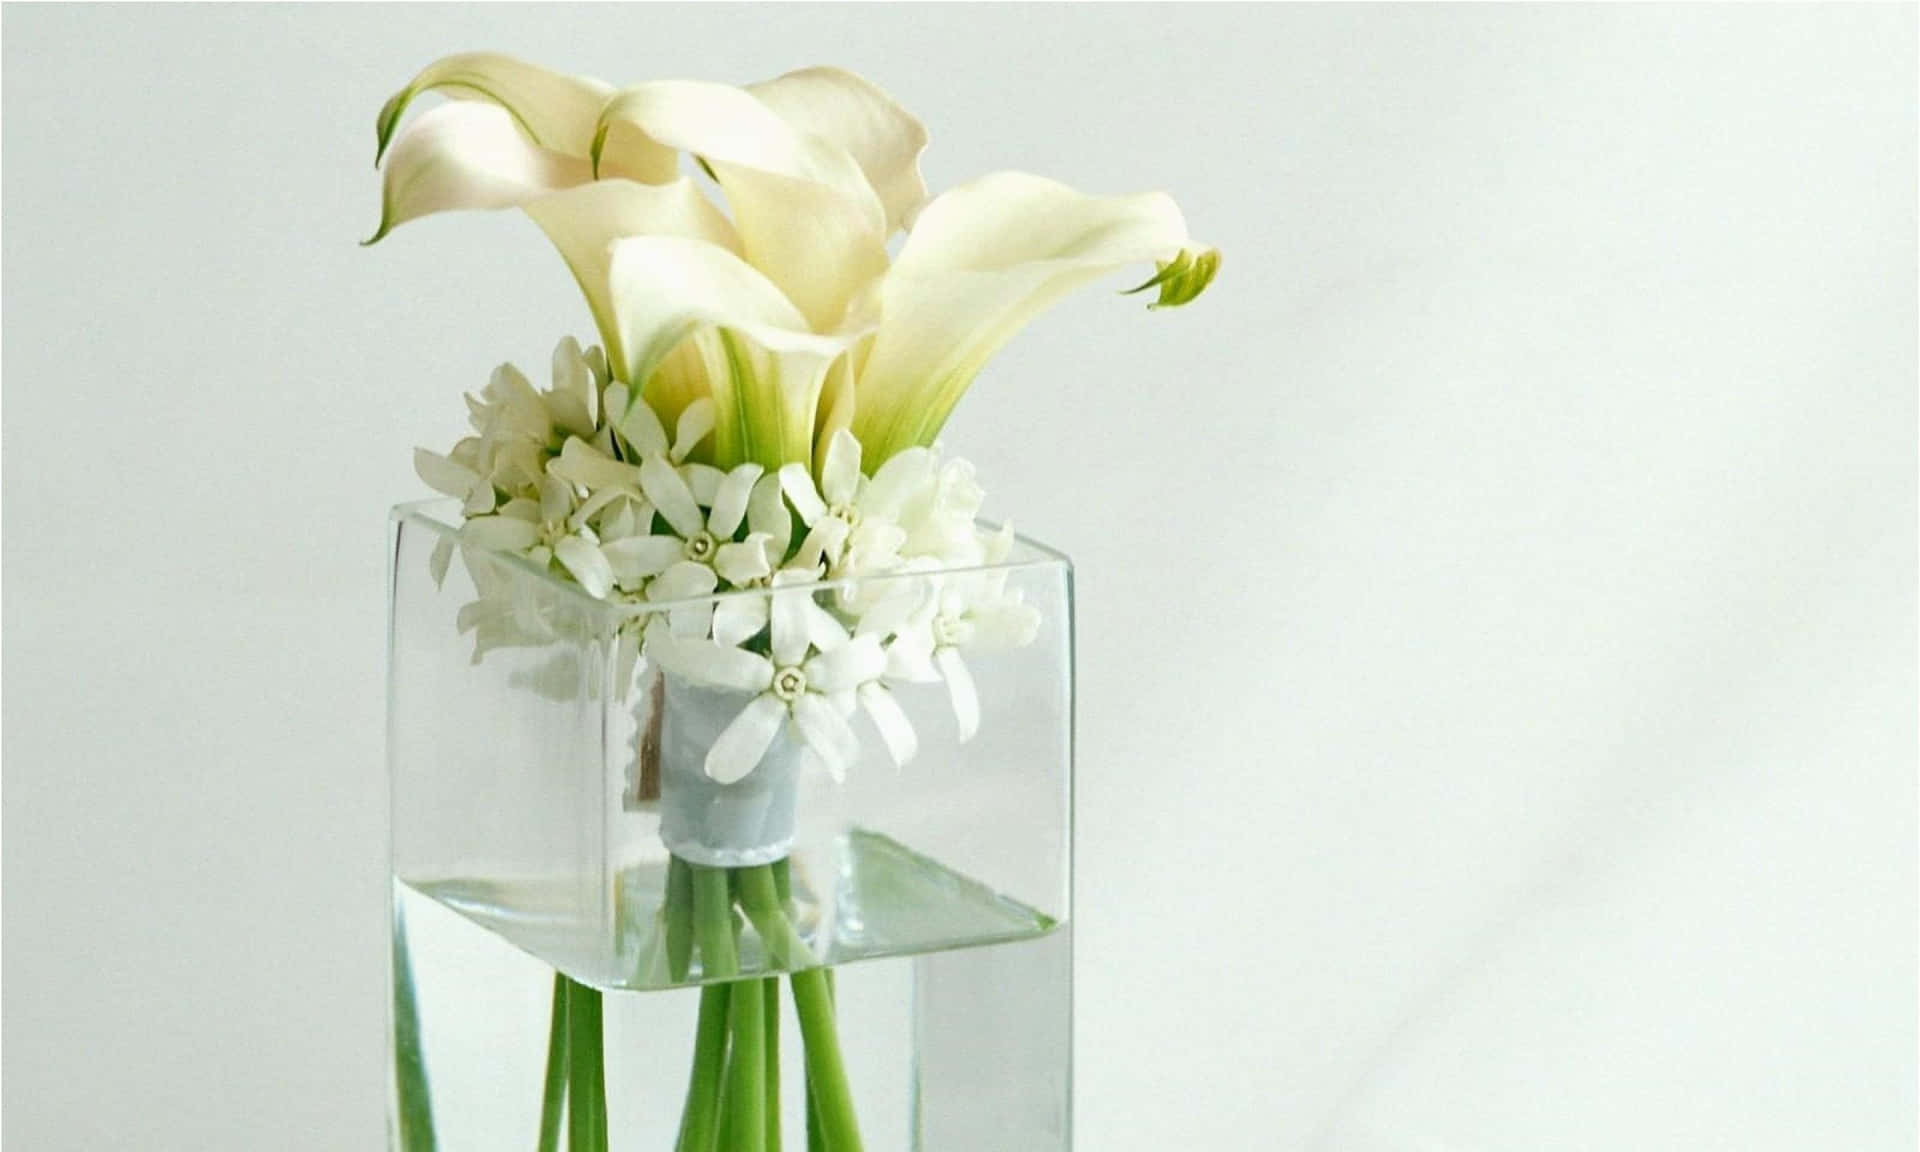 Captivating Beauty of White Flowers